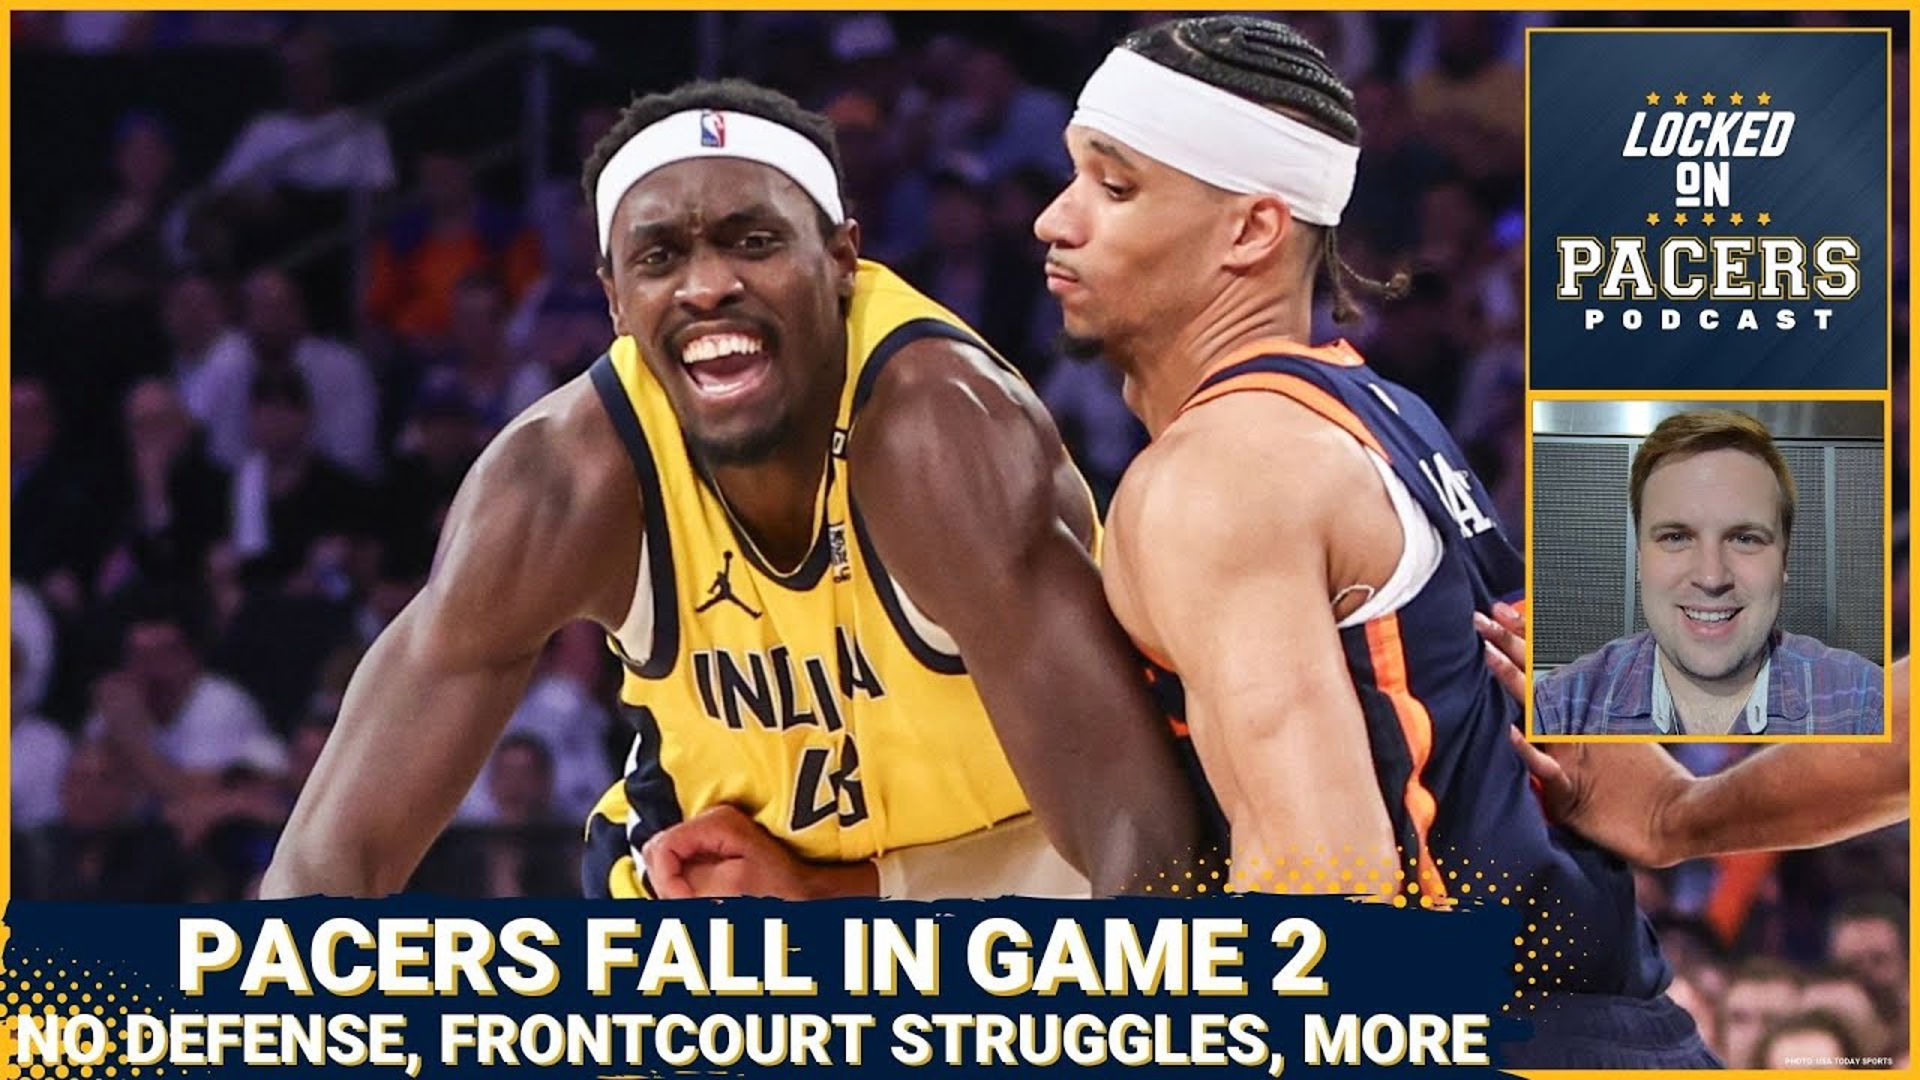 Frontcourt woes + poor 2nd half has Indiana Pacers down 0-2 vs New York Knicks. Can Pacers recover?